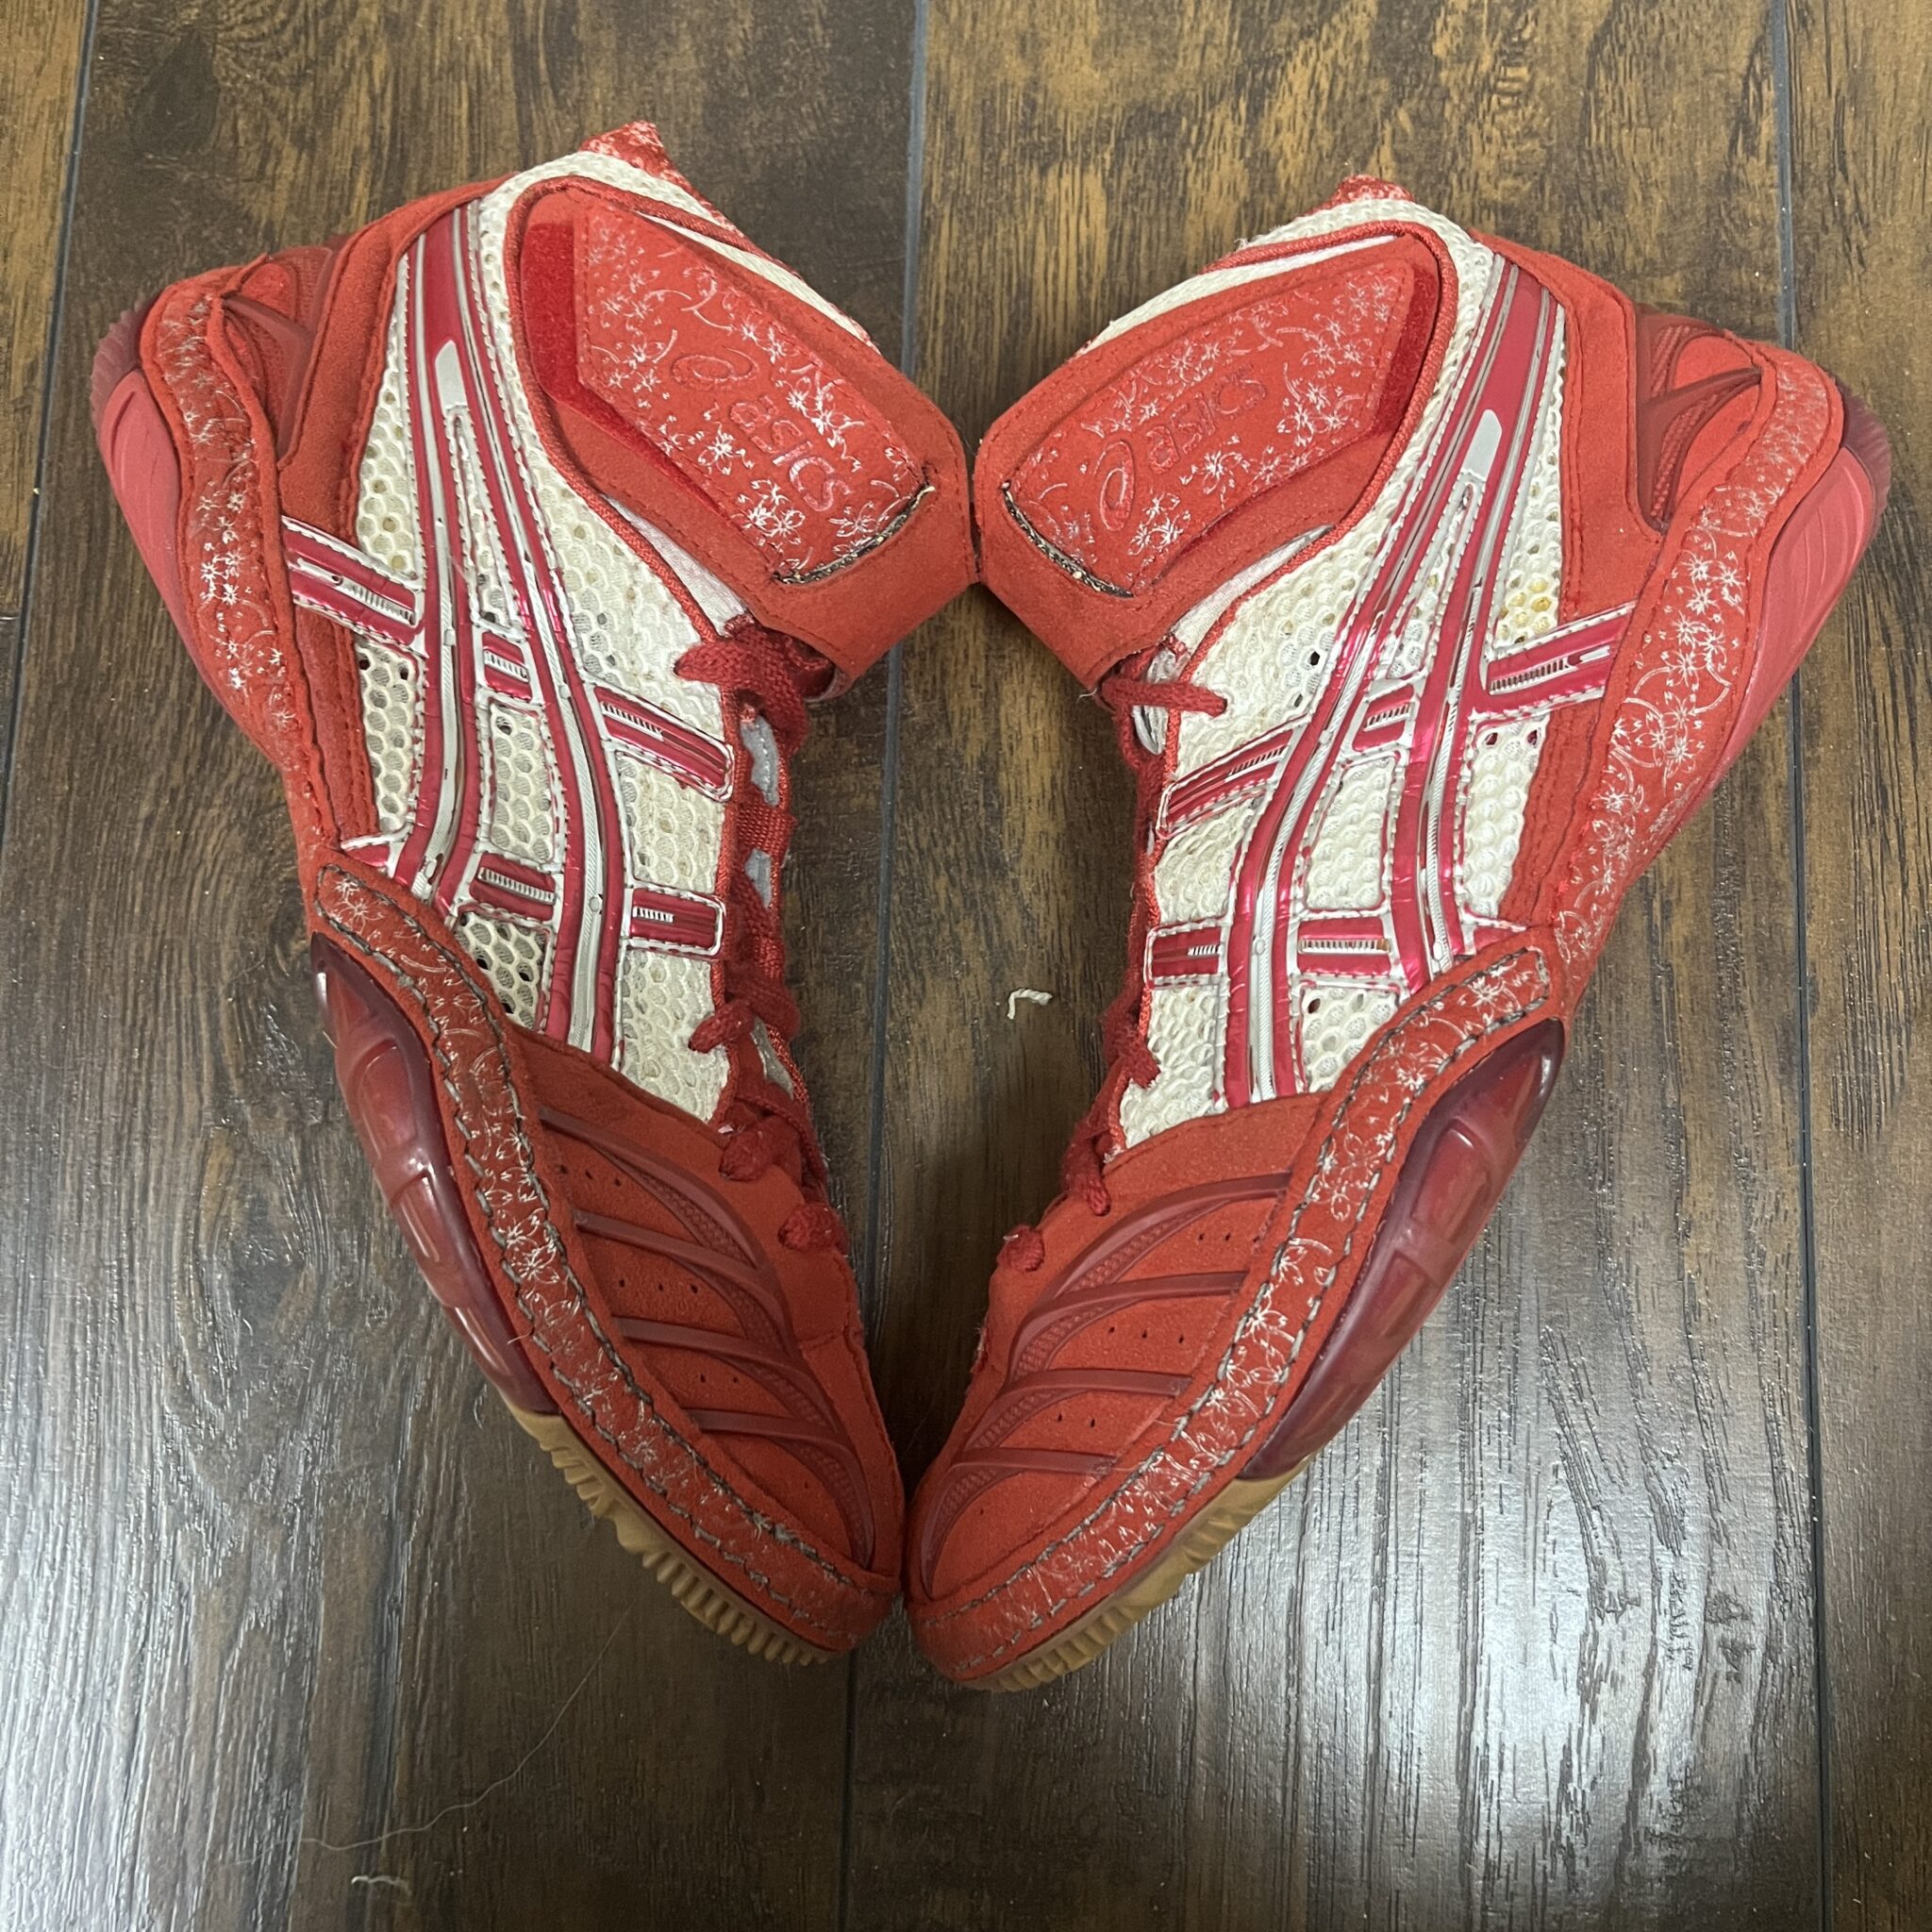 red and white asics ultratek wrestling shoes